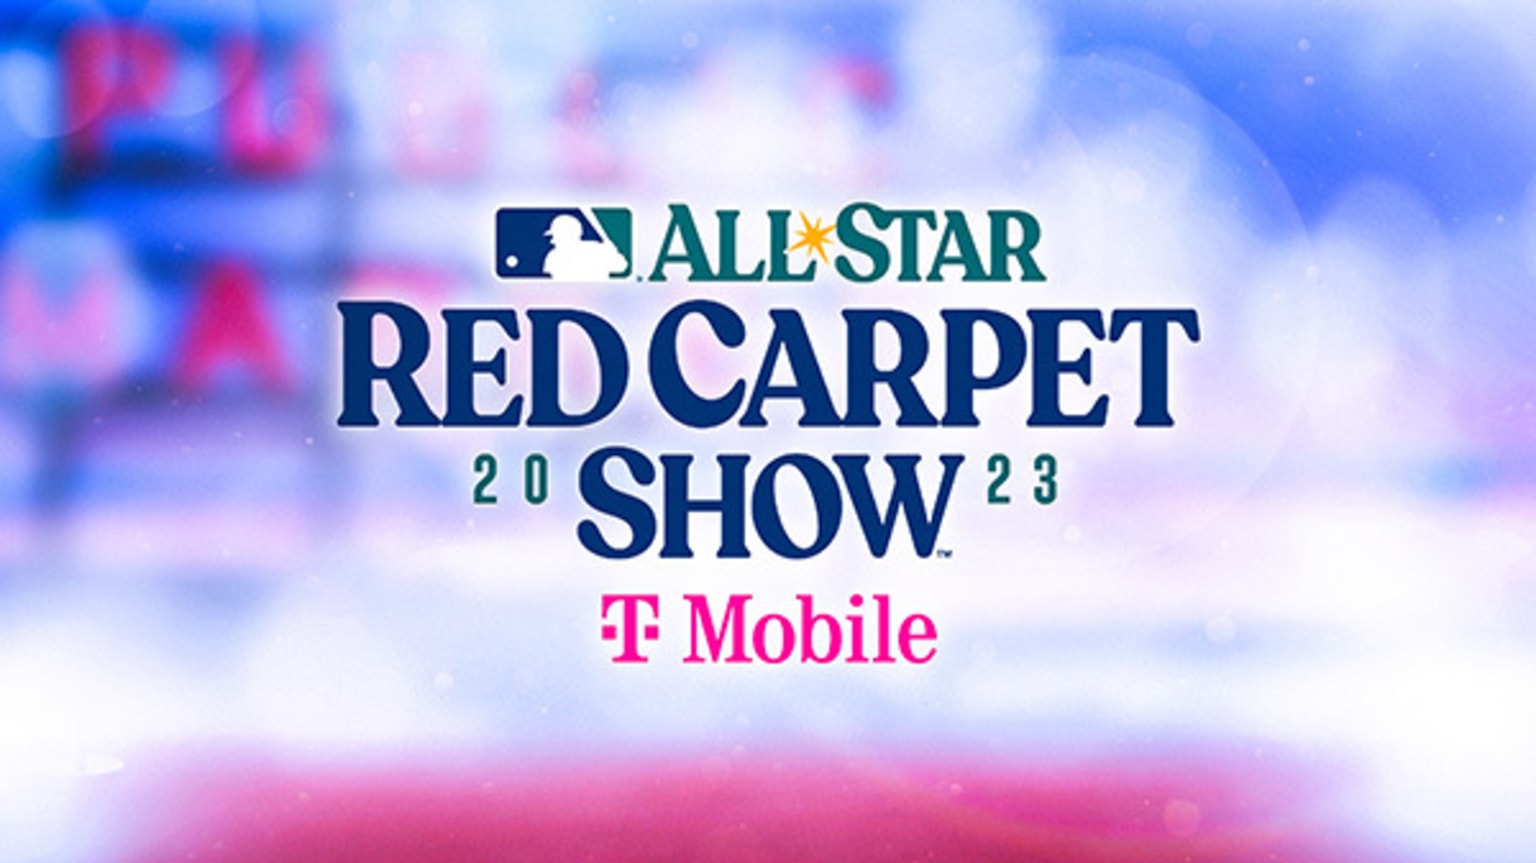 MLB® The Show™ - The All-Star Week Program brings all of the stars